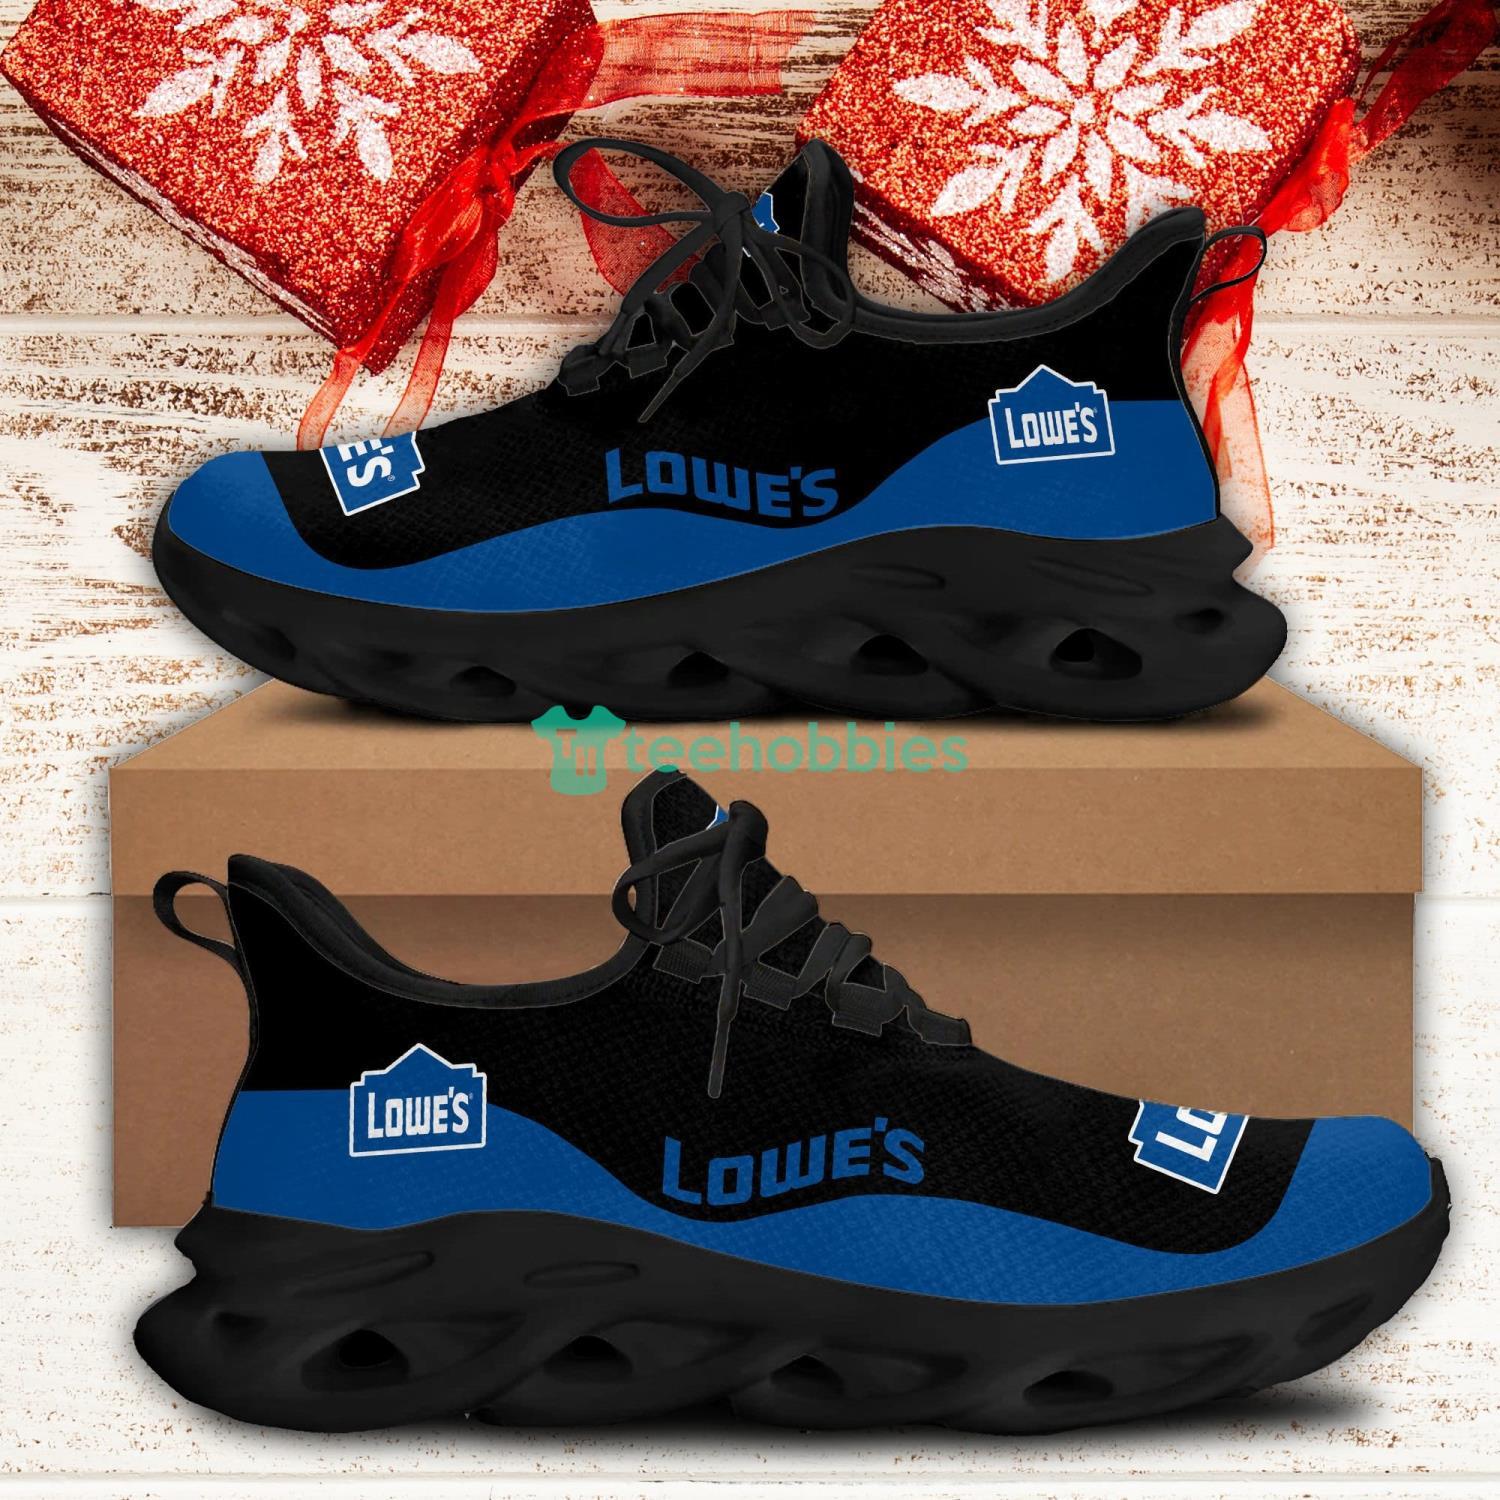 lowe's Max Shoes Running Sneakers Black Blue Product Photo 1